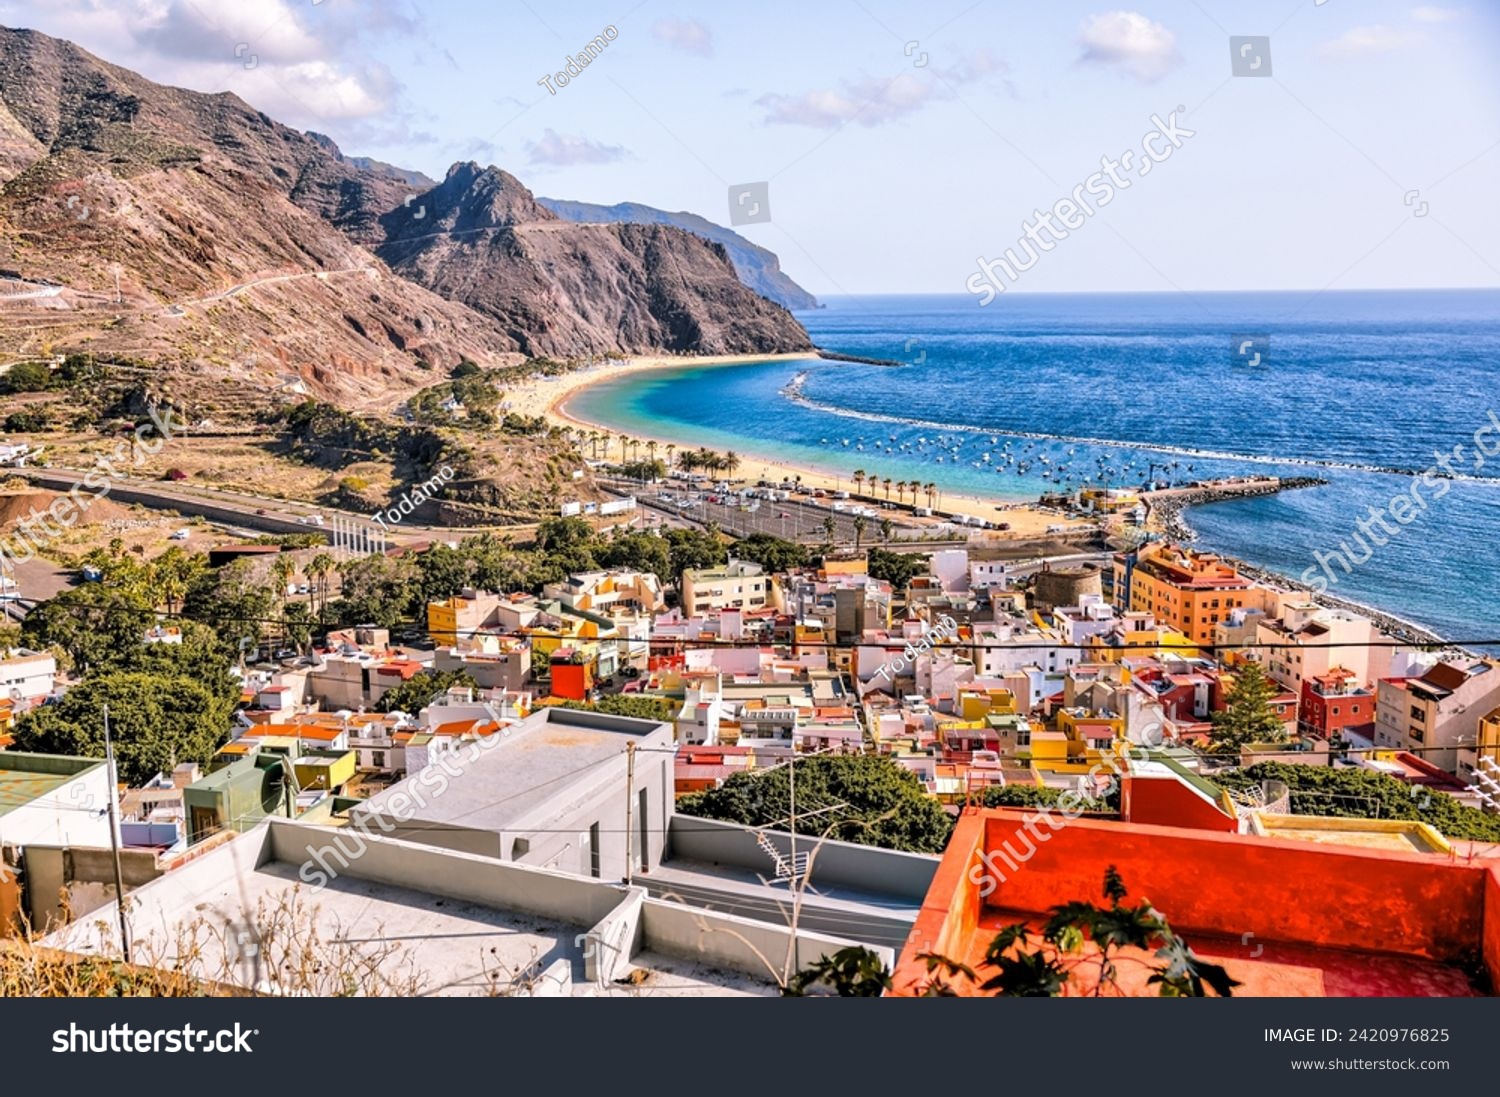 Tenerife, Spain - December 25, 2023: Aerial views of the town of San Andres and the beaches of Playa de las Teresitas on the island of Tenerife in Spain's Canary Islands
 #2420976825